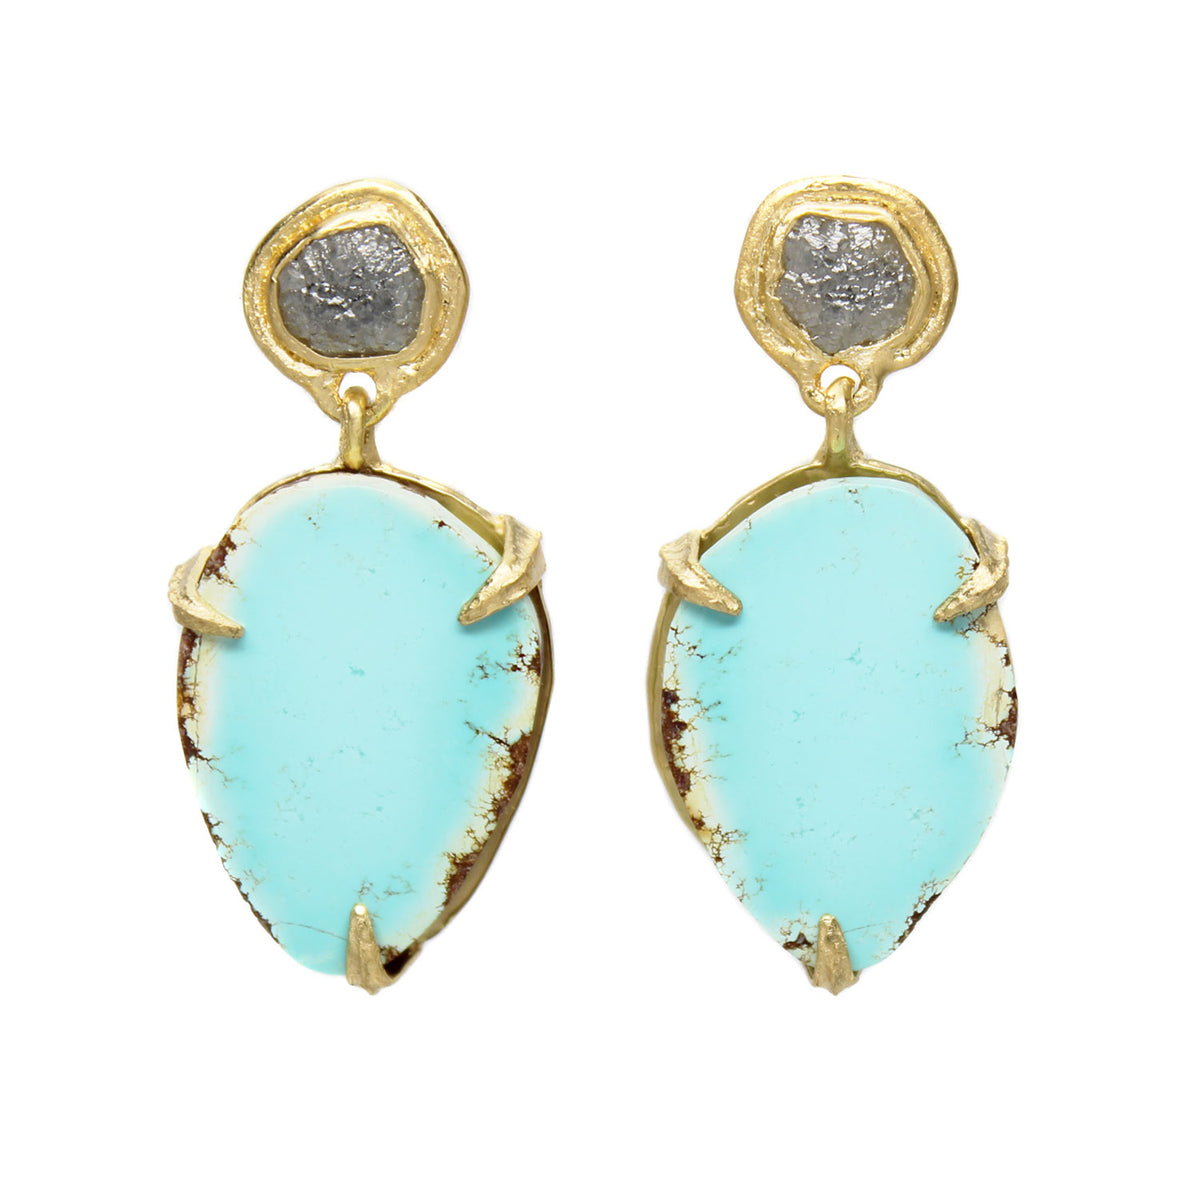 One-of-a-Kind Diamond and Turquoise Earrings